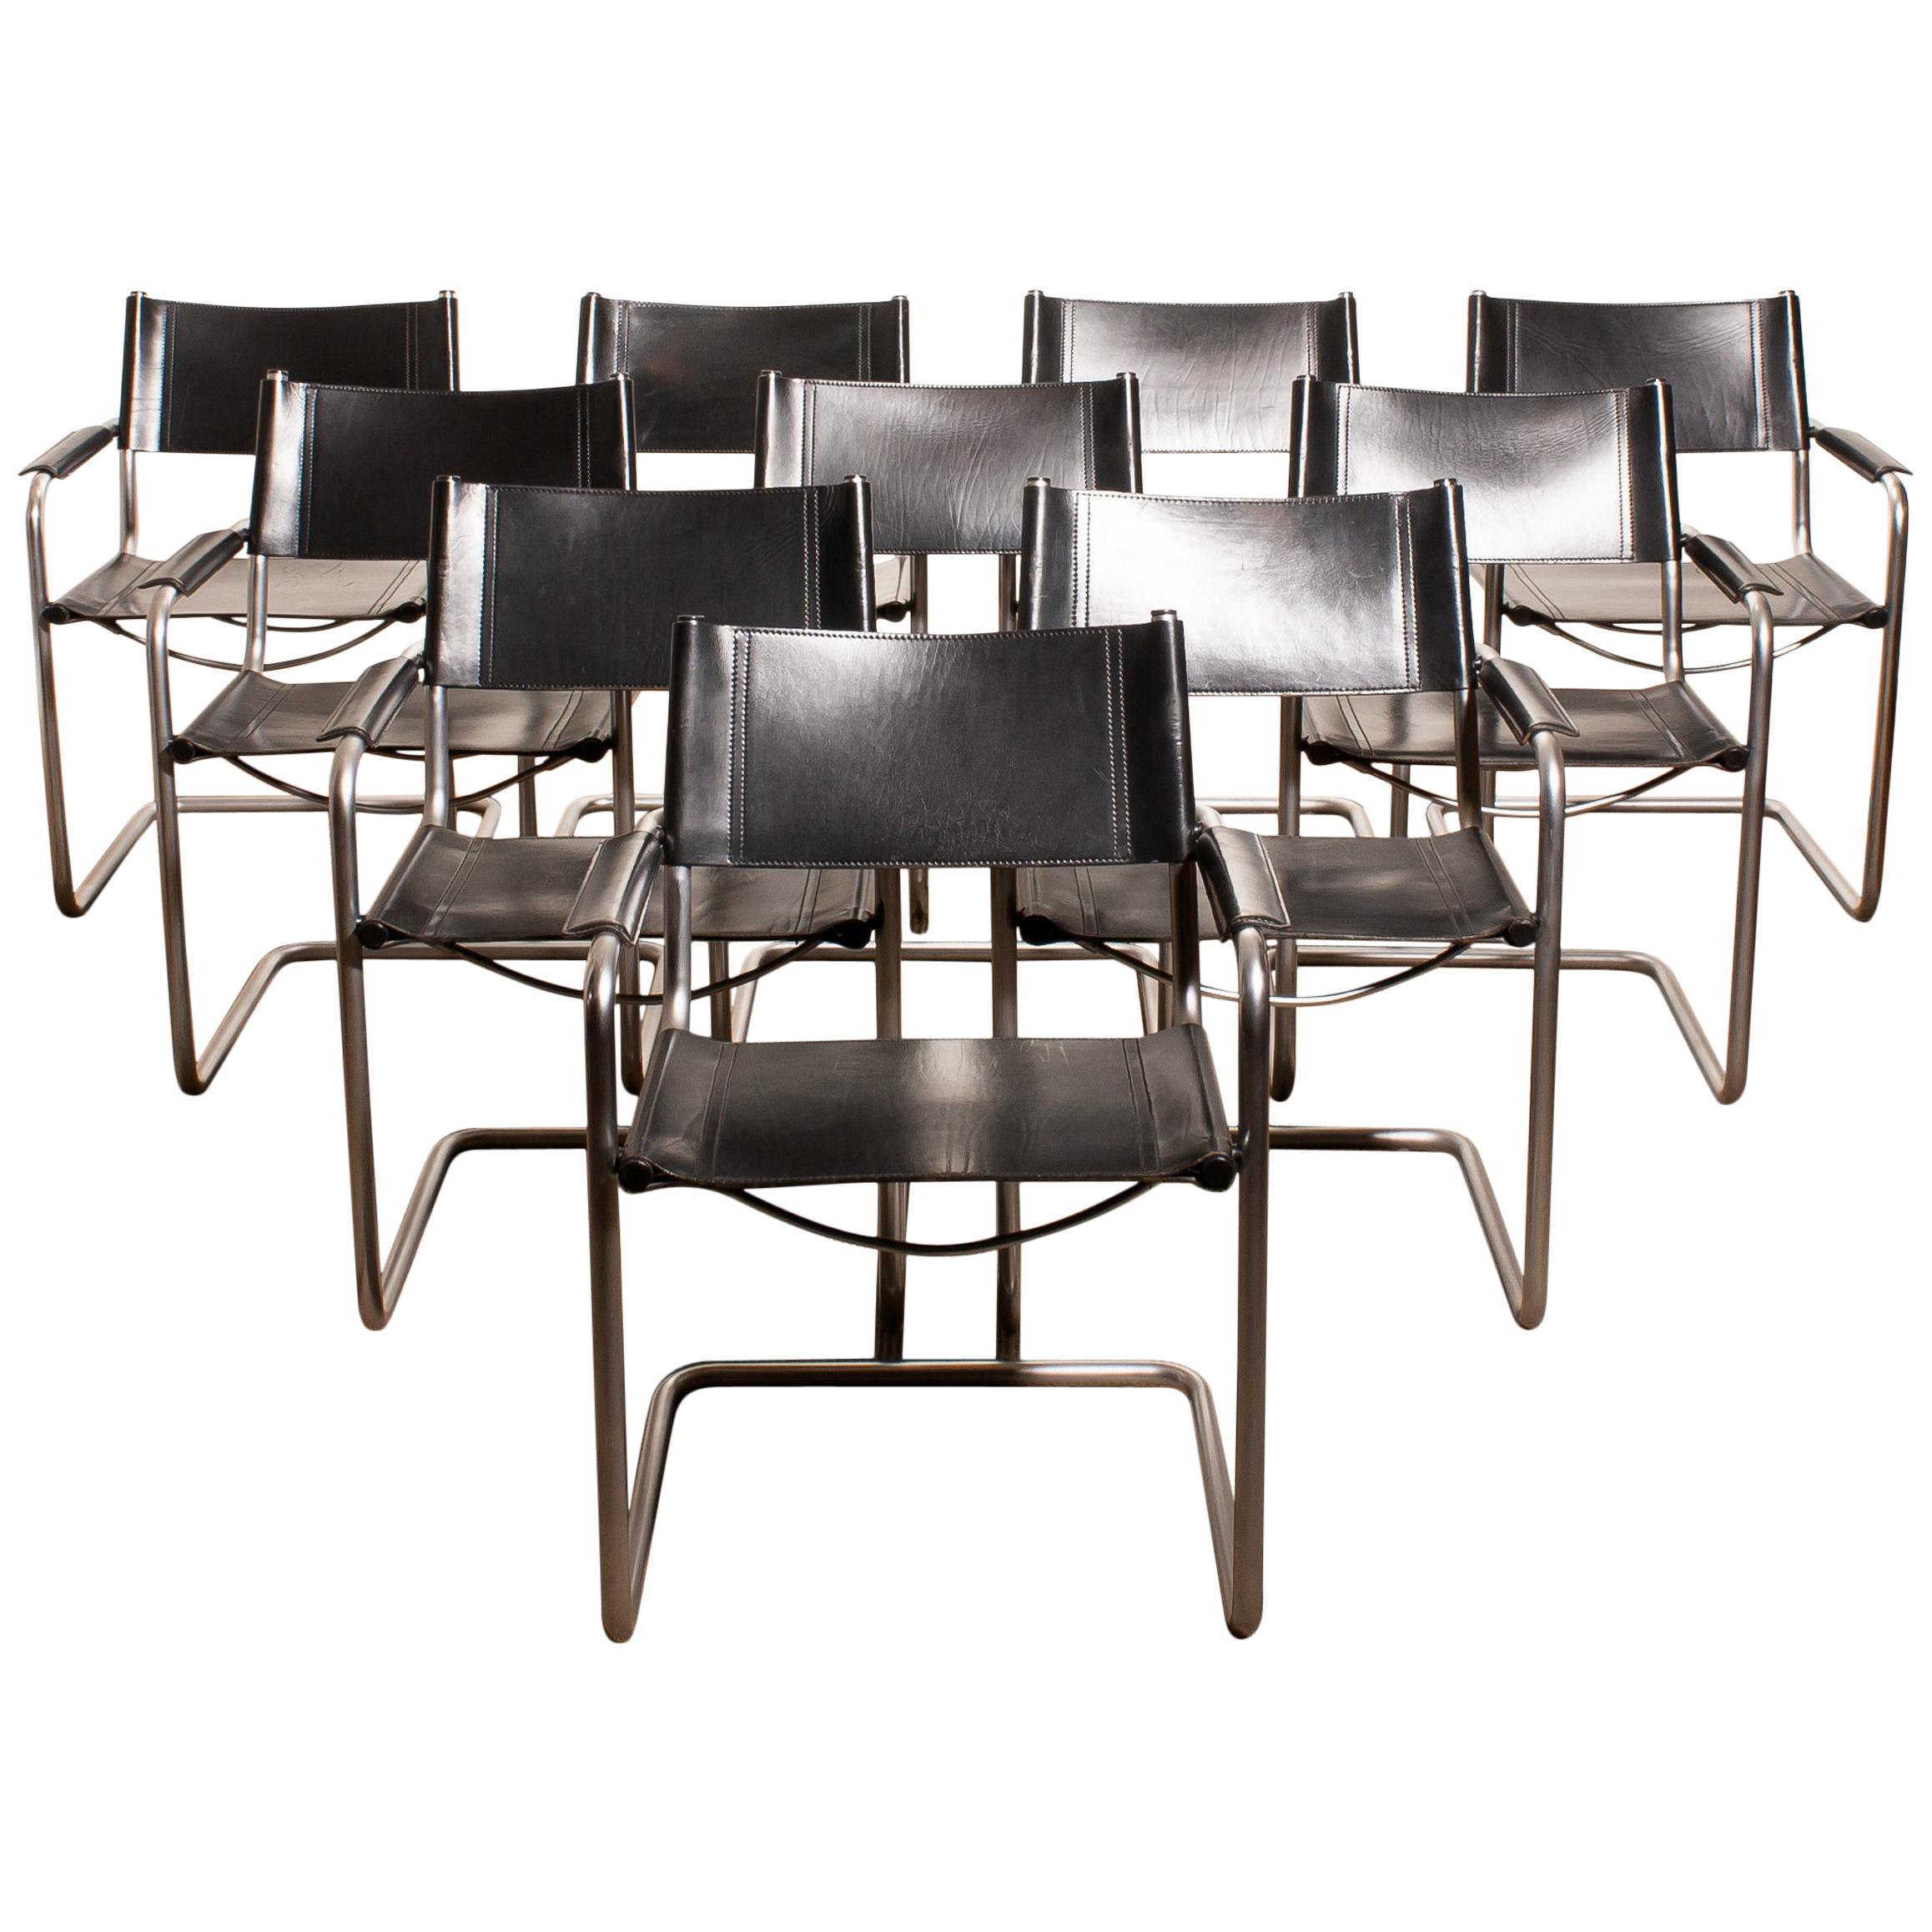 1970s Set of Ten Tubular Steel and Leather Dining Chairs by Matteo Grassi